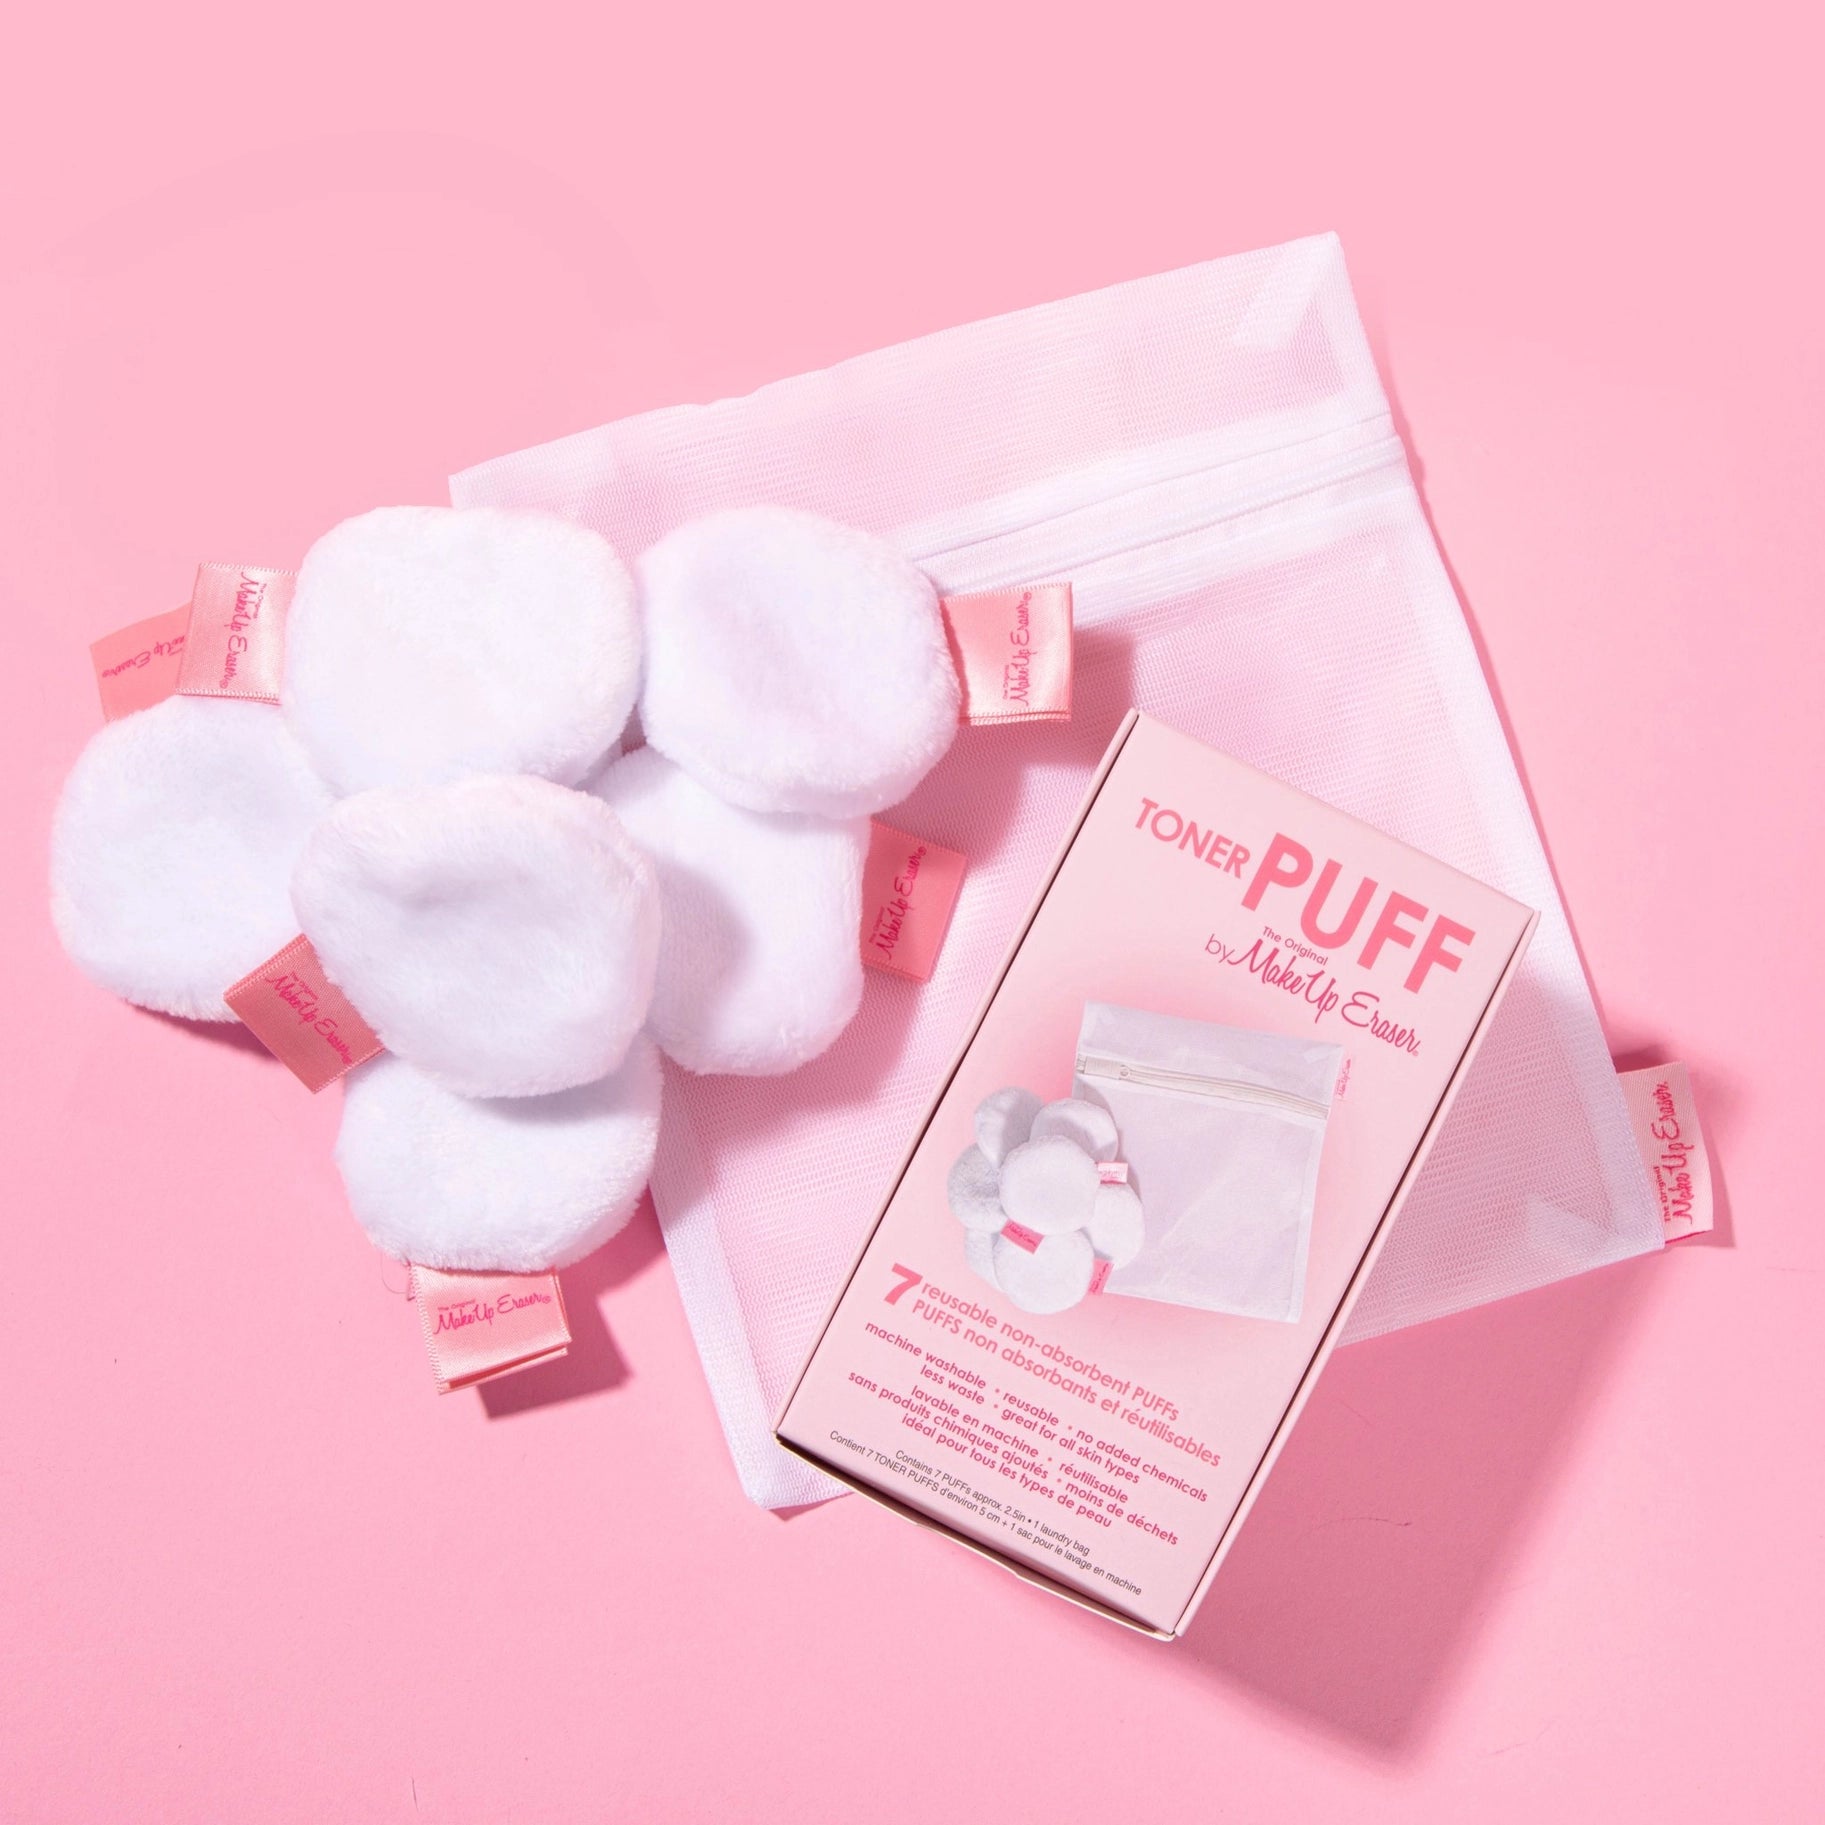 Makeup Eraser Toner Puff 7 Pack - Bye bye cotton rounds forever! - Totality Medispa and Skincare